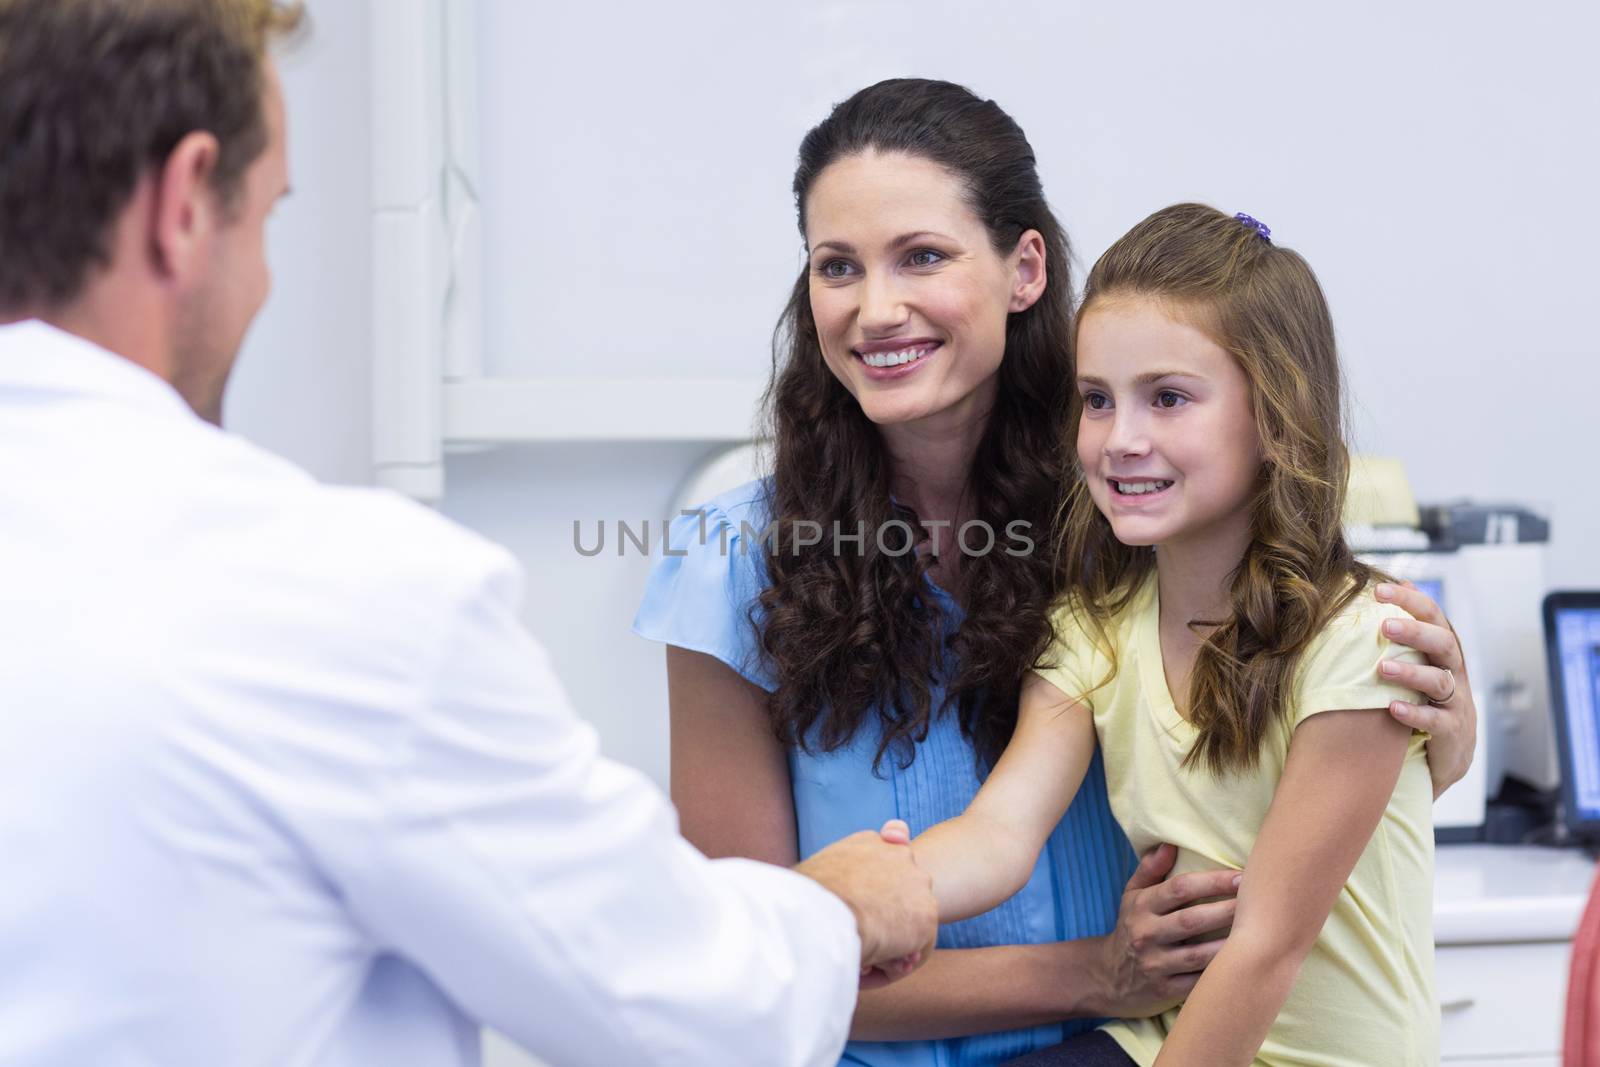 Dentist shaking hand with daughter after dental examination at dental clinic